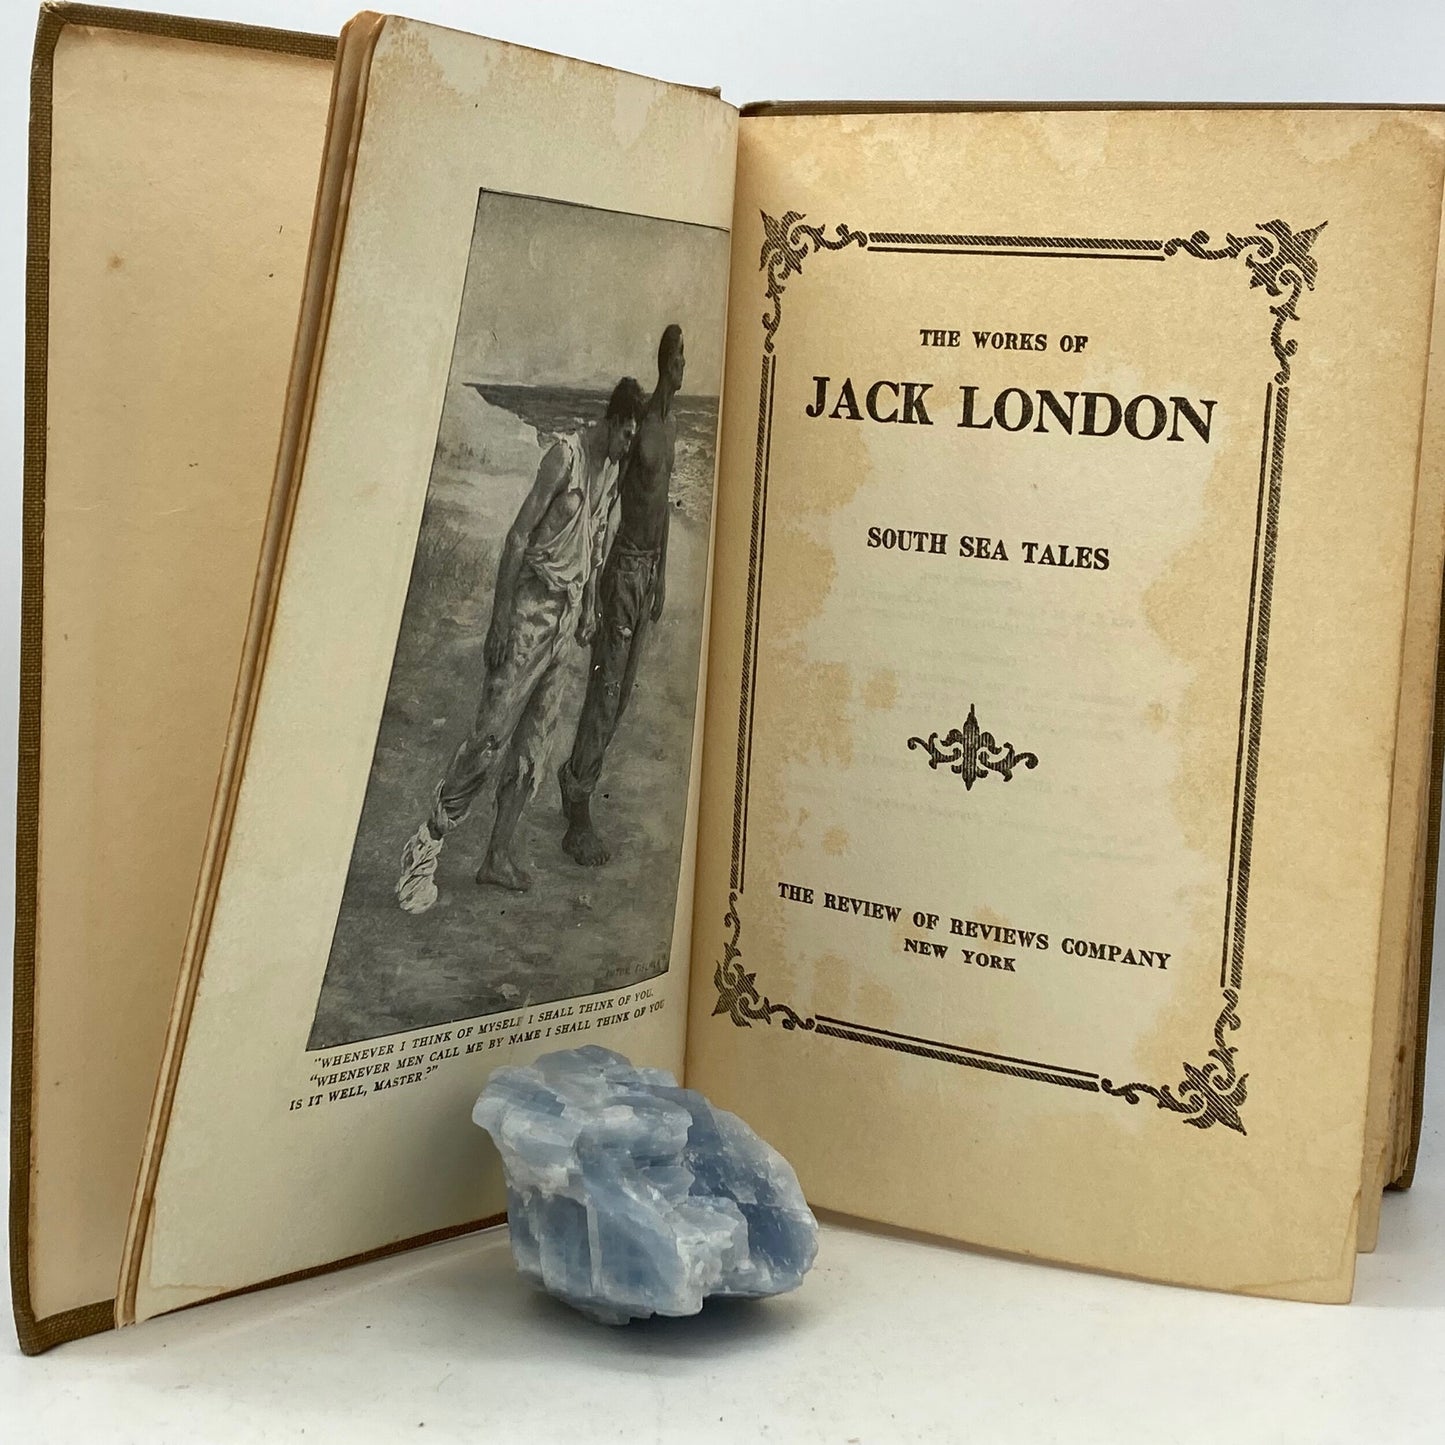 LONDON, Jack "South Sea Tales" [Review of Reviews Co, 1911] - Buzz Bookstore